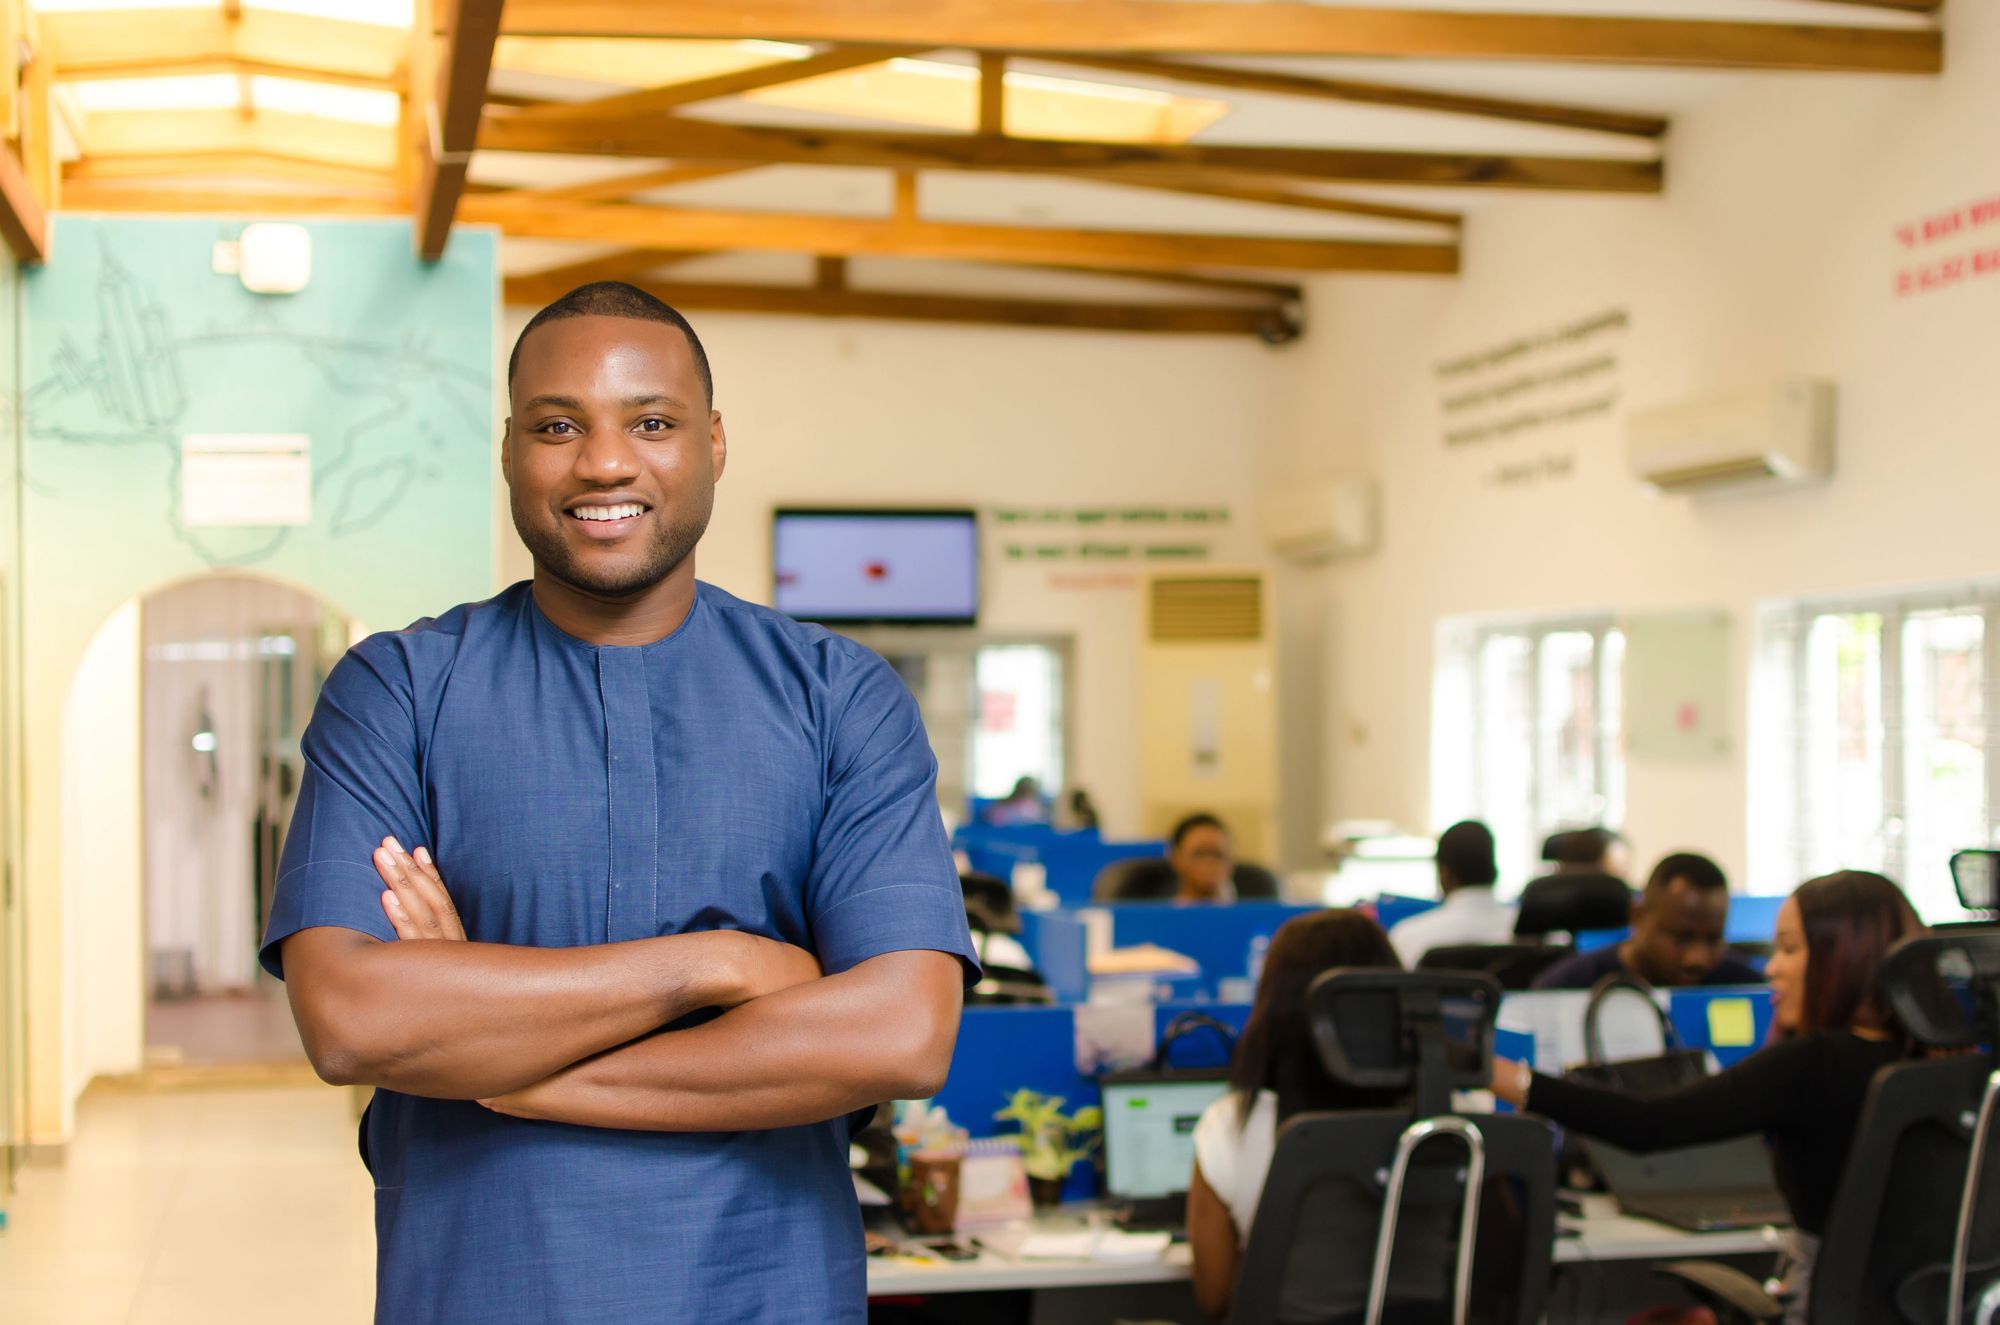 African mobility fintech Moove raises £15 million to scale operations in the UK